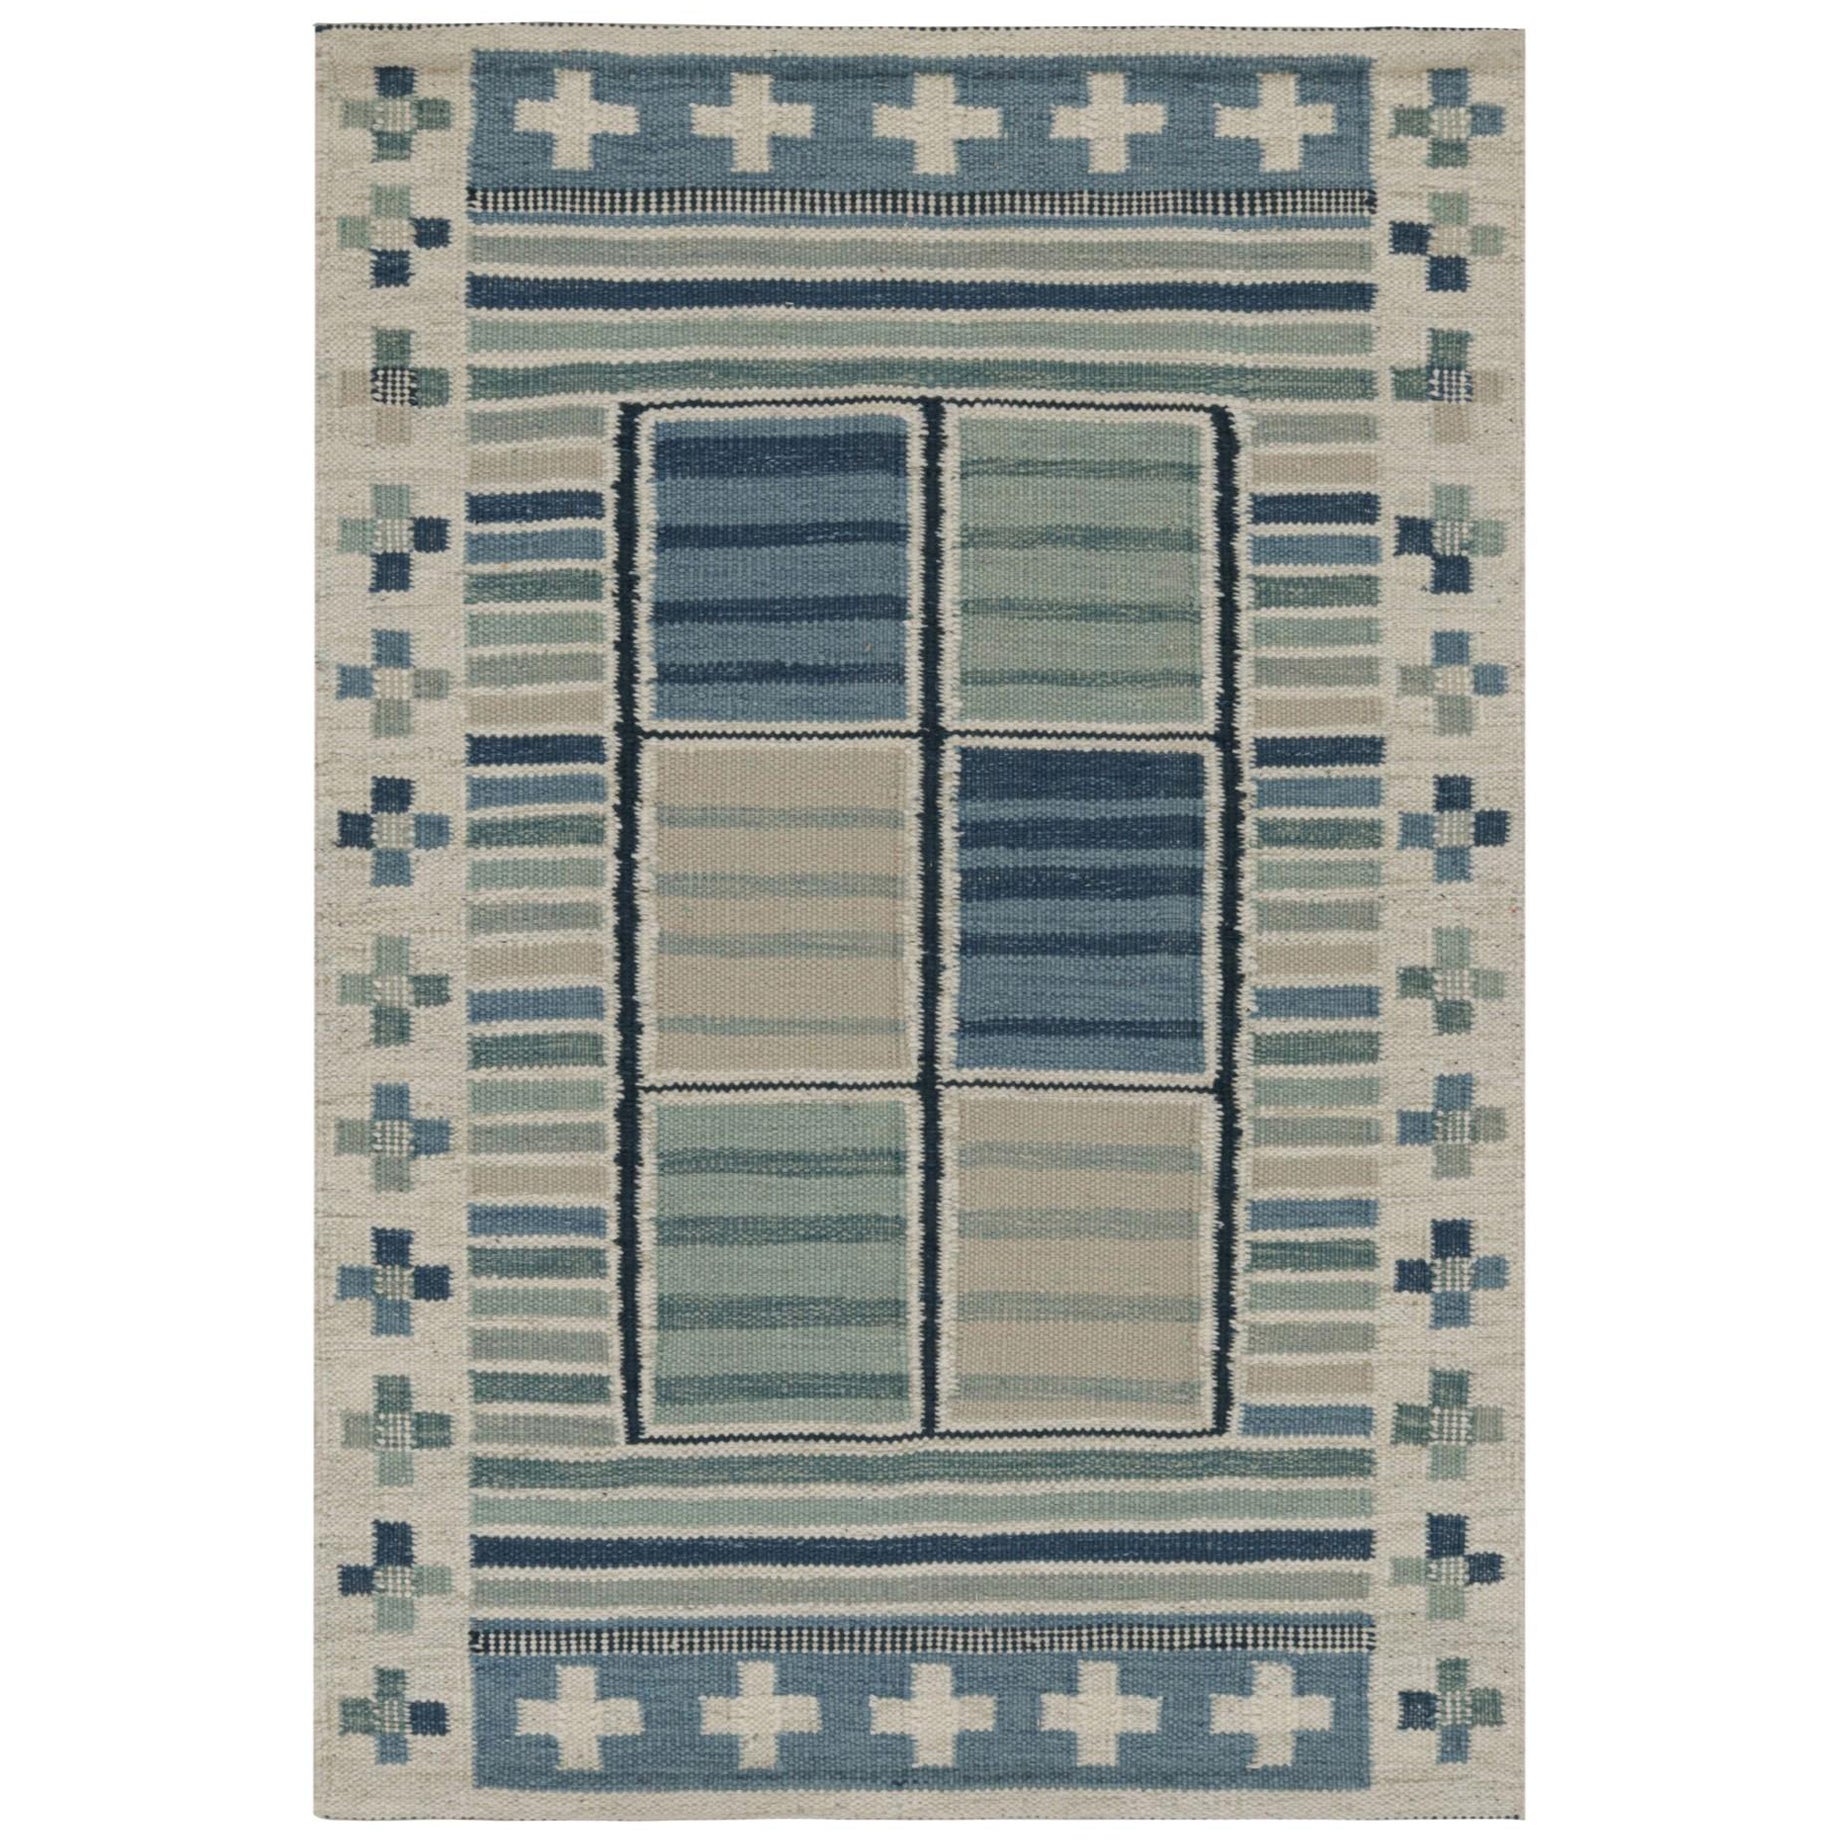 Rug & Kilim’s Scandinavian Kilim and Scatter Rug with Patterns in Cool Blue Tone For Sale